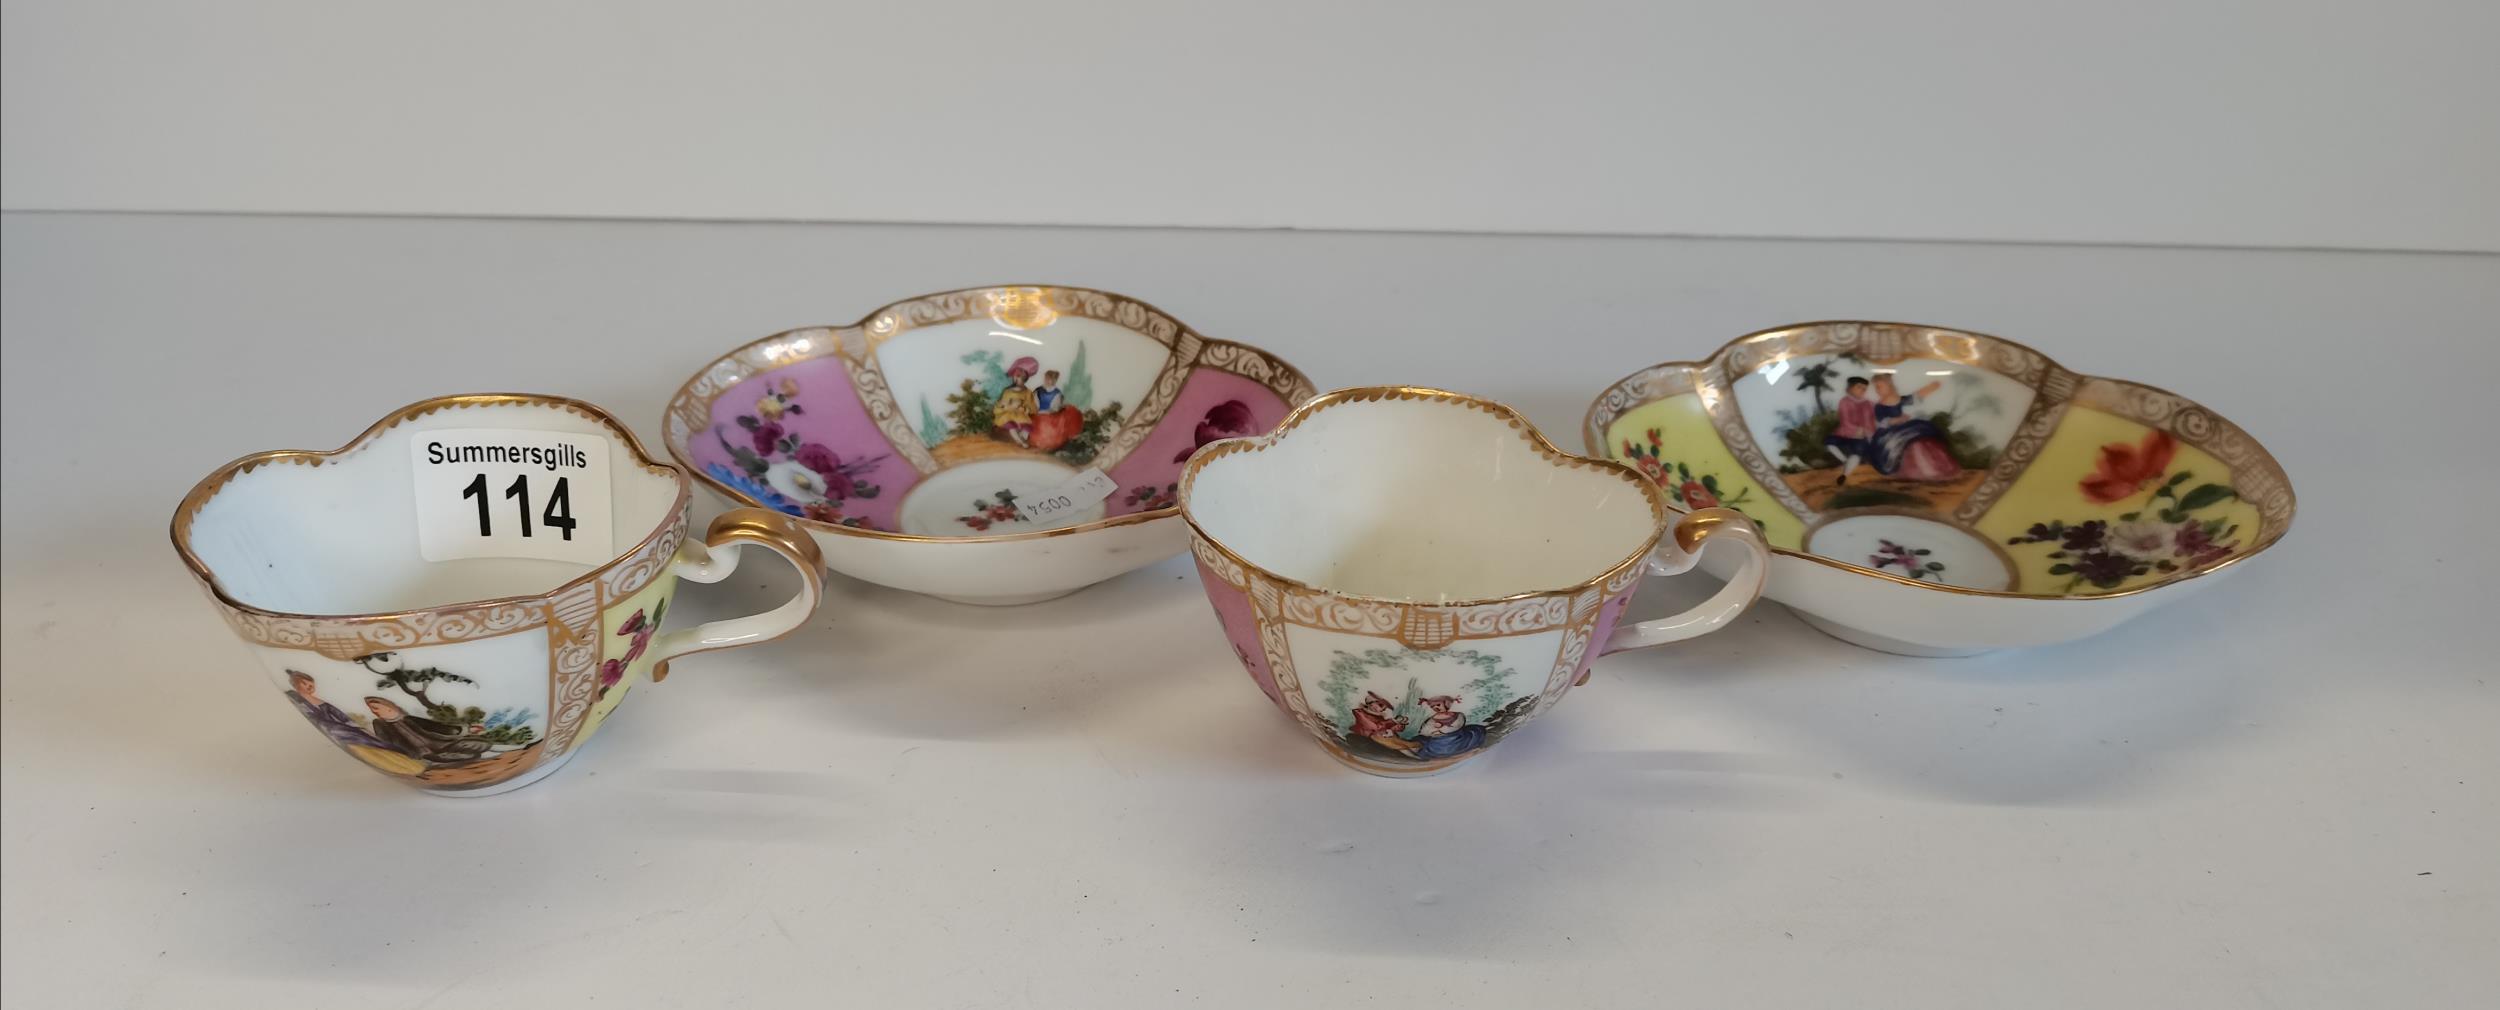 x2 Meissen cups and saucers - Image 2 of 3